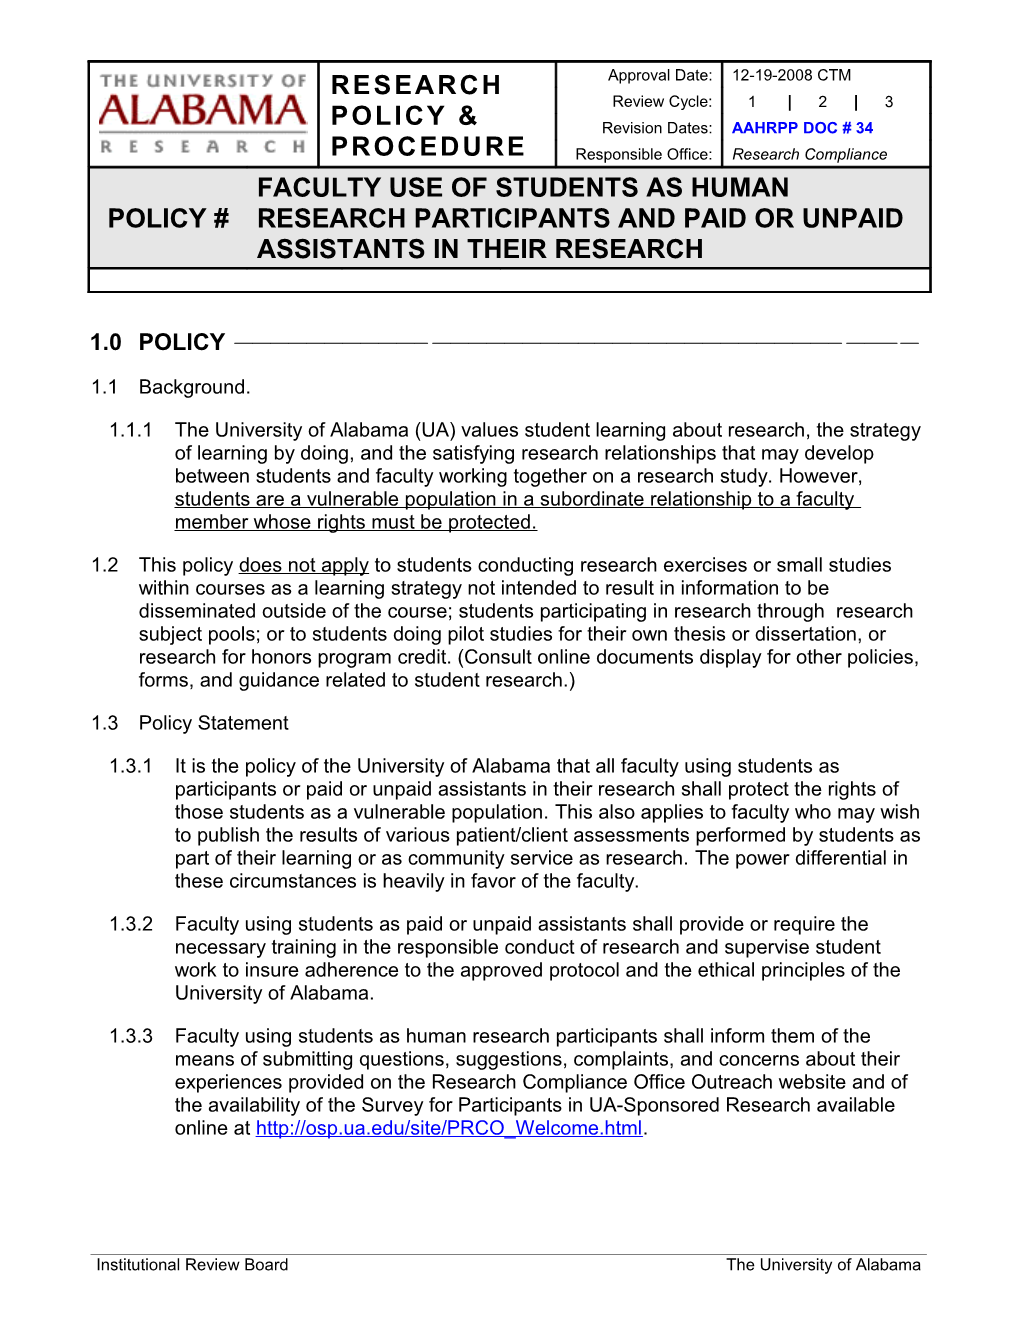 1.2 This Policy Does Not Apply to Students Conducting Research Exercises Or Small Studies